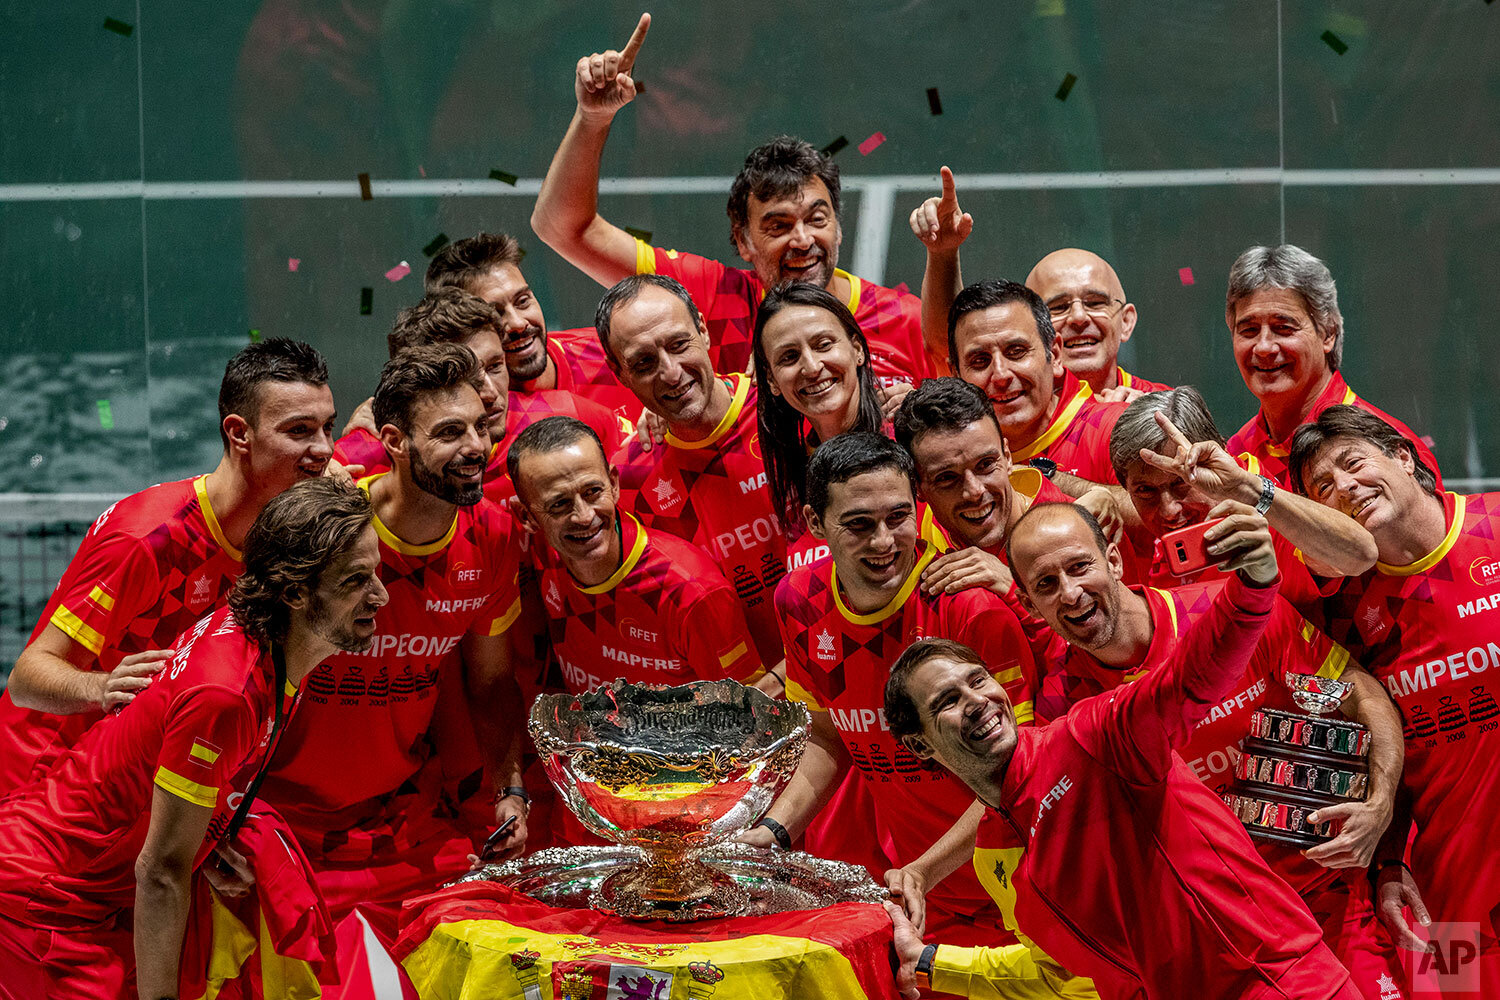  Spain's Rafael Nadal, foreground, takes a selfie with fellow players and team staff posing with the trophy after Spain defeated Canada 2-0 to win the Davis Cup final in Madrid, Spain, Sunday, Nov. 24, 2019. (AP Photo/Bernat Armangue) 